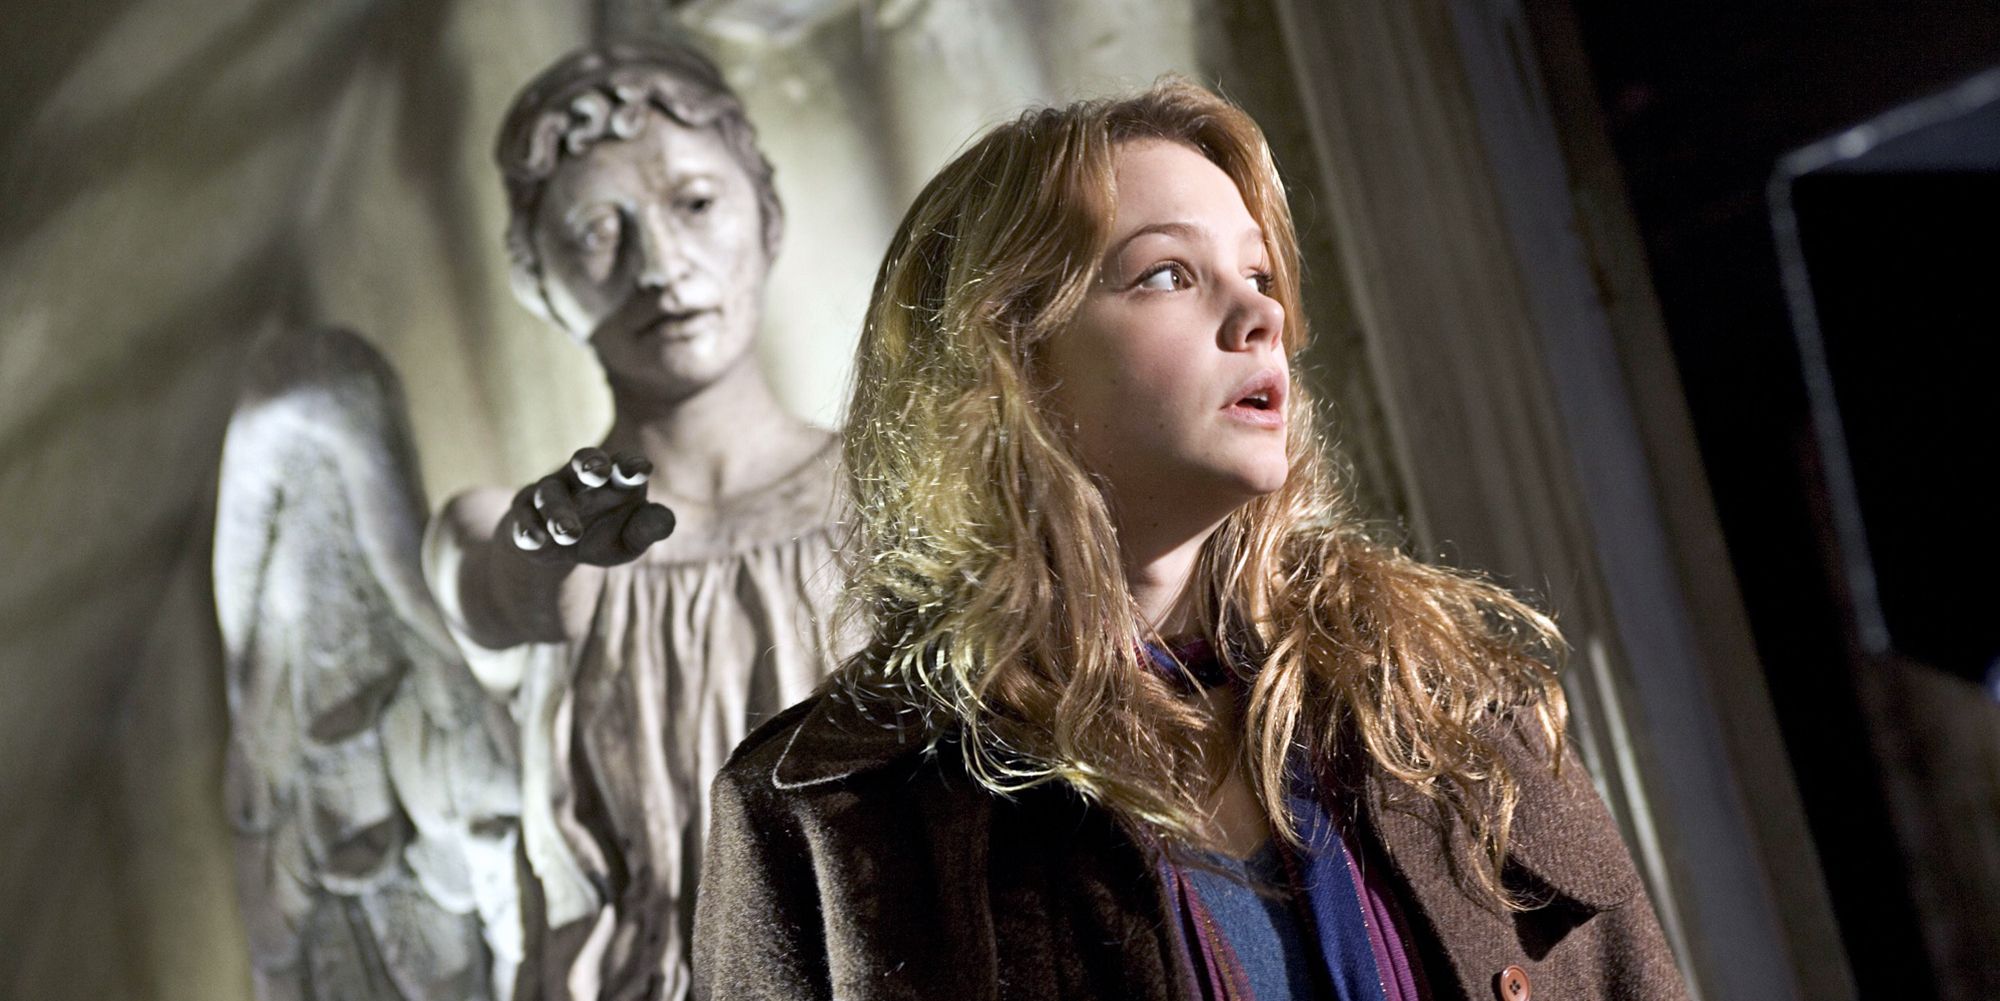 The Weeping Angels appeared to run out of steam when chasing Sally (Carey Mulligan) in 